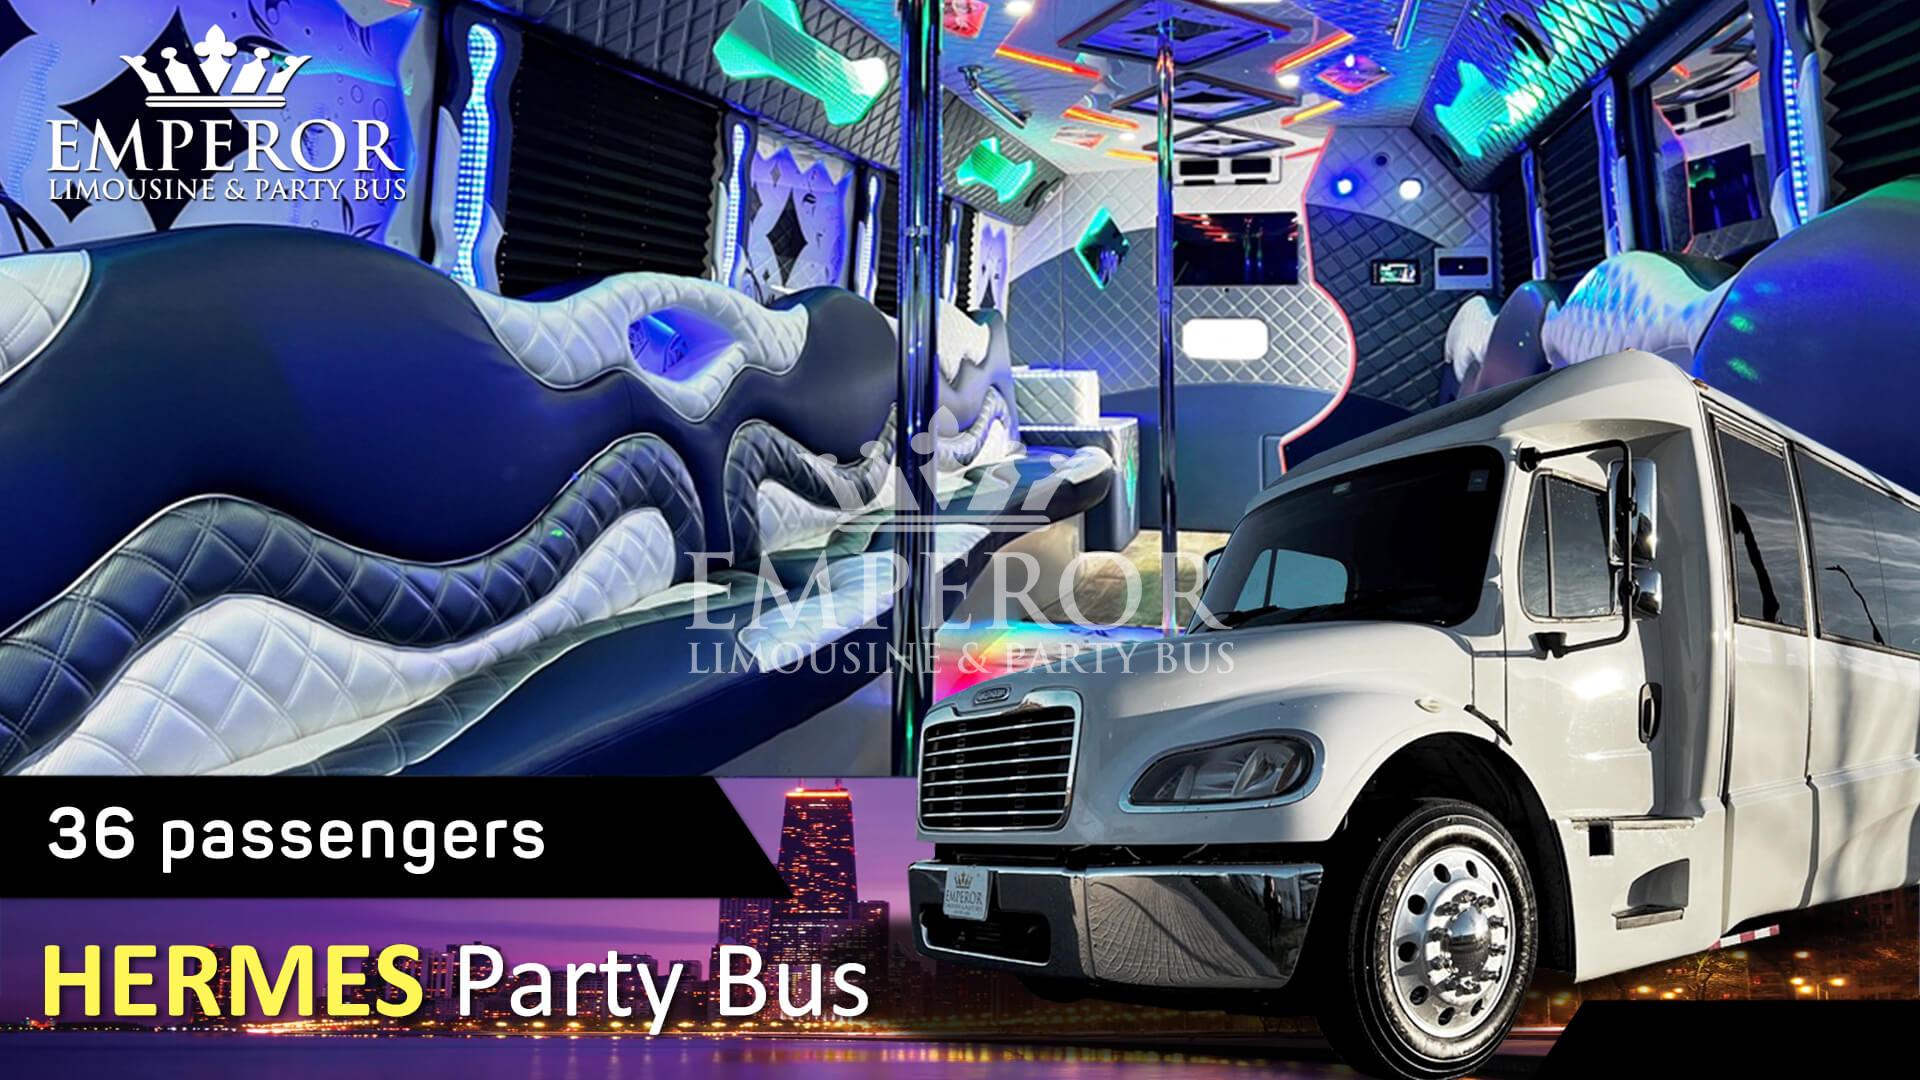 Bachelorette Party bus rental in Chicago, IL - Hermes Edition